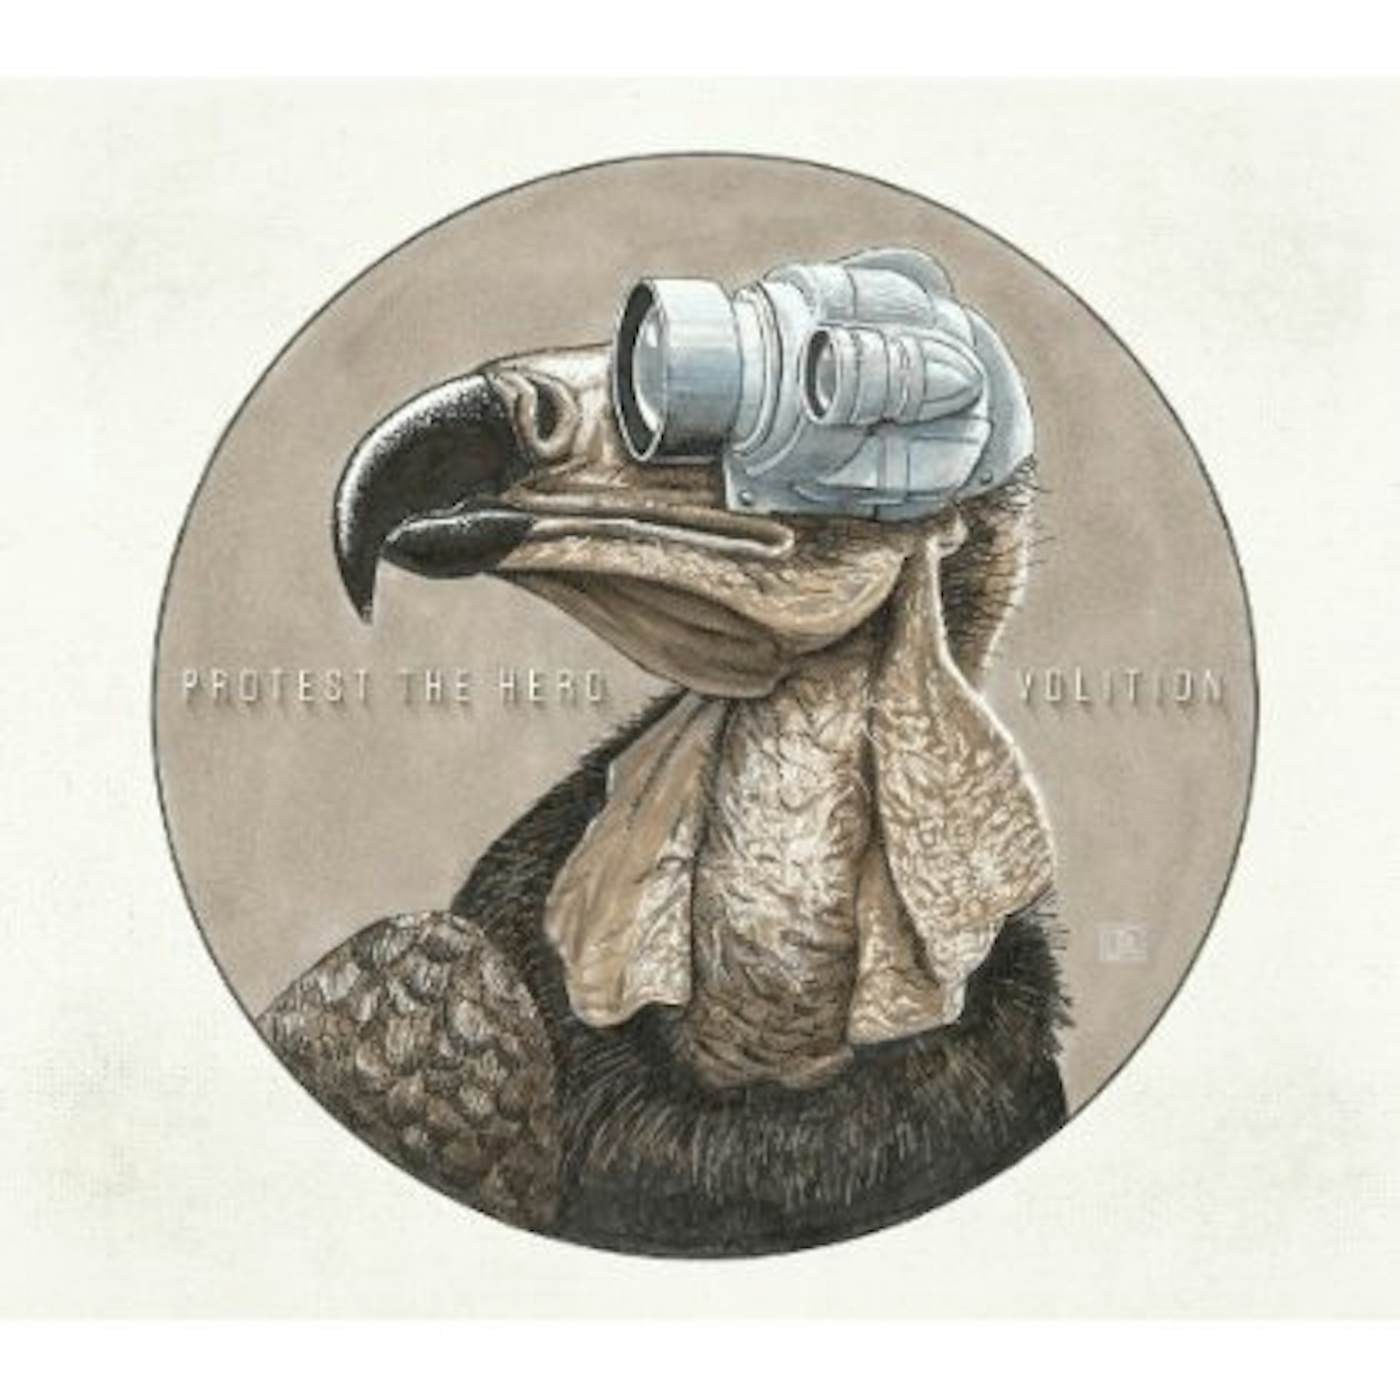 Protest The Hero VOLITION CD